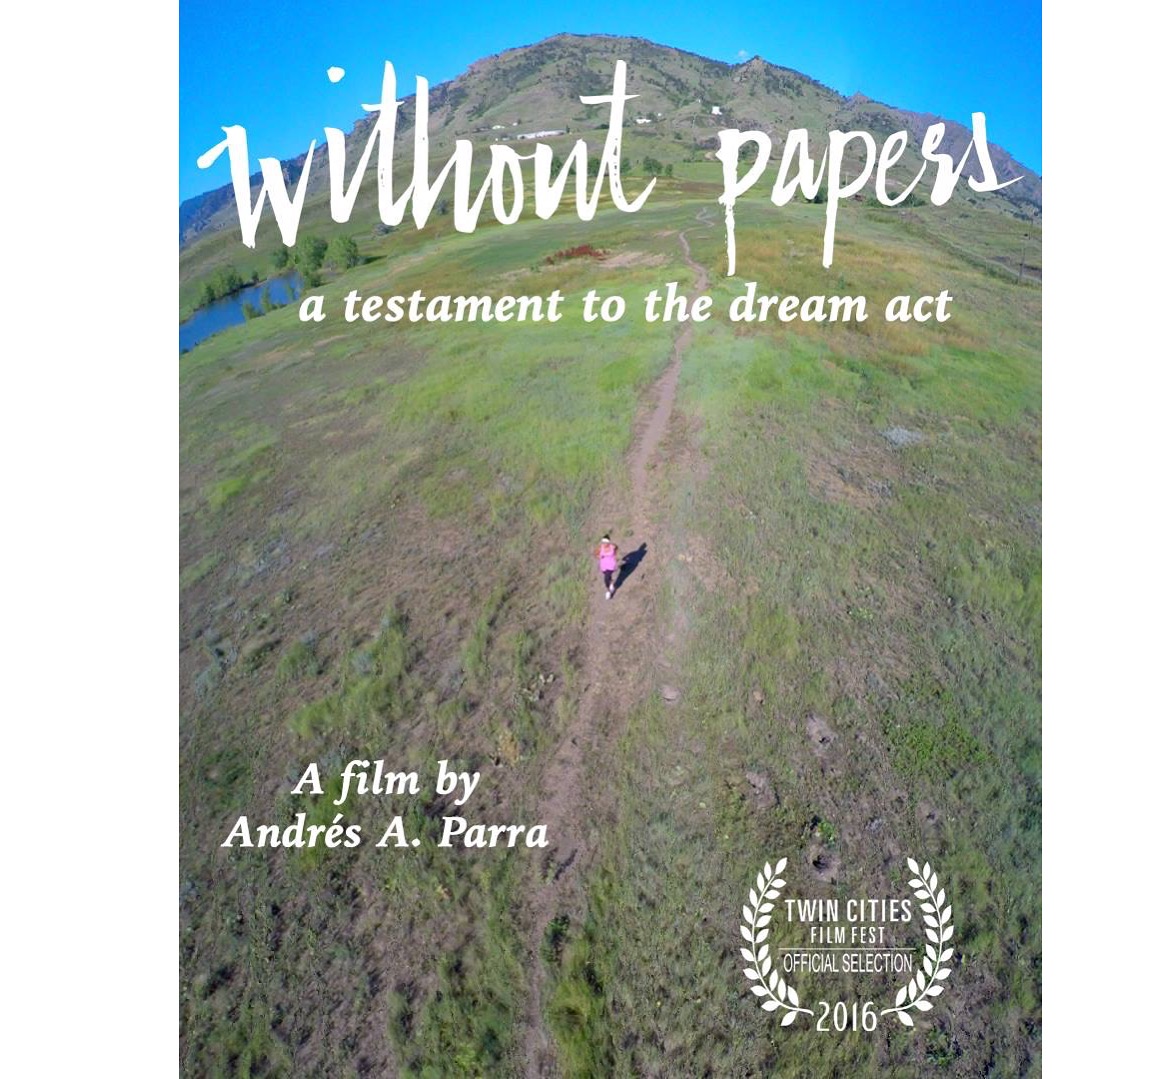 Without papers